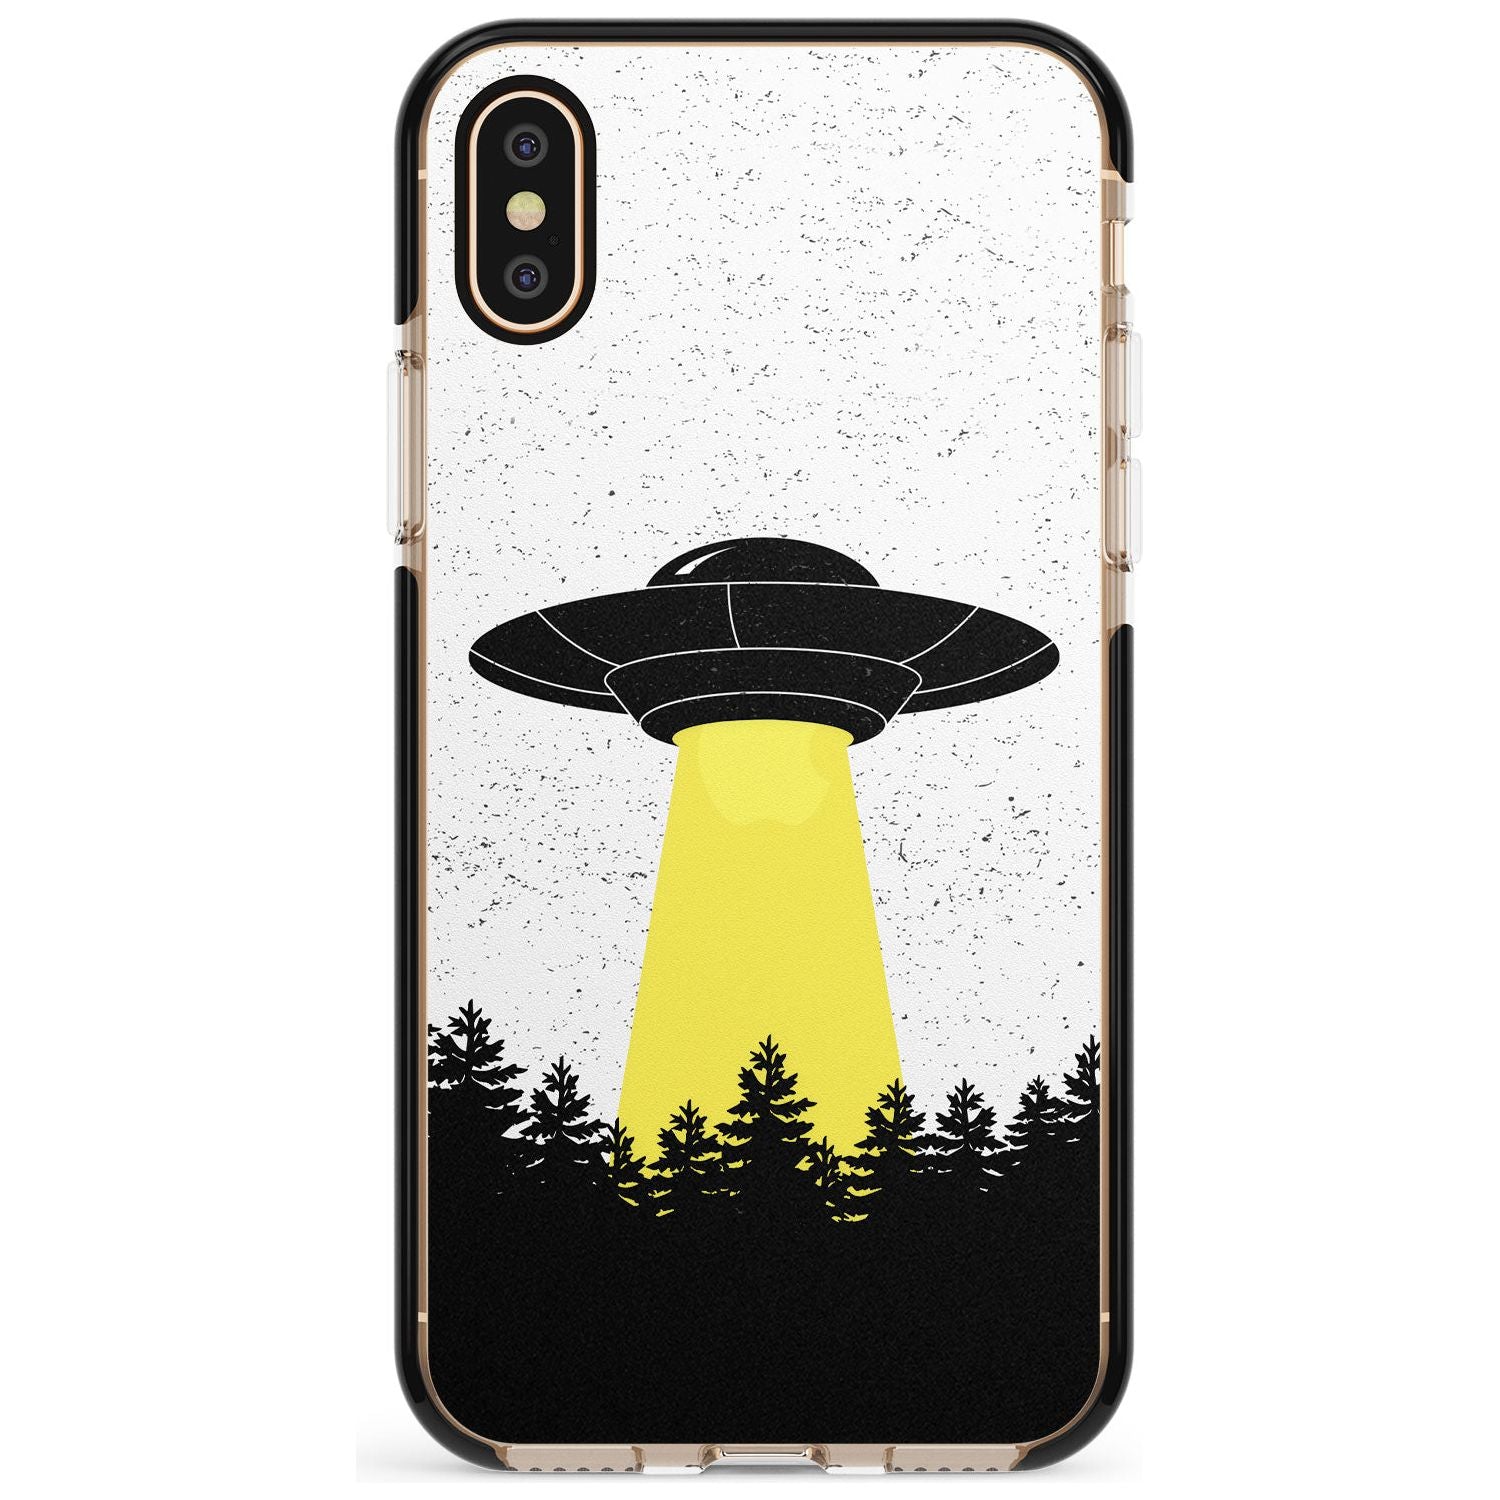 Forest Abduction Black Impact Phone Case for iPhone X XS Max XR